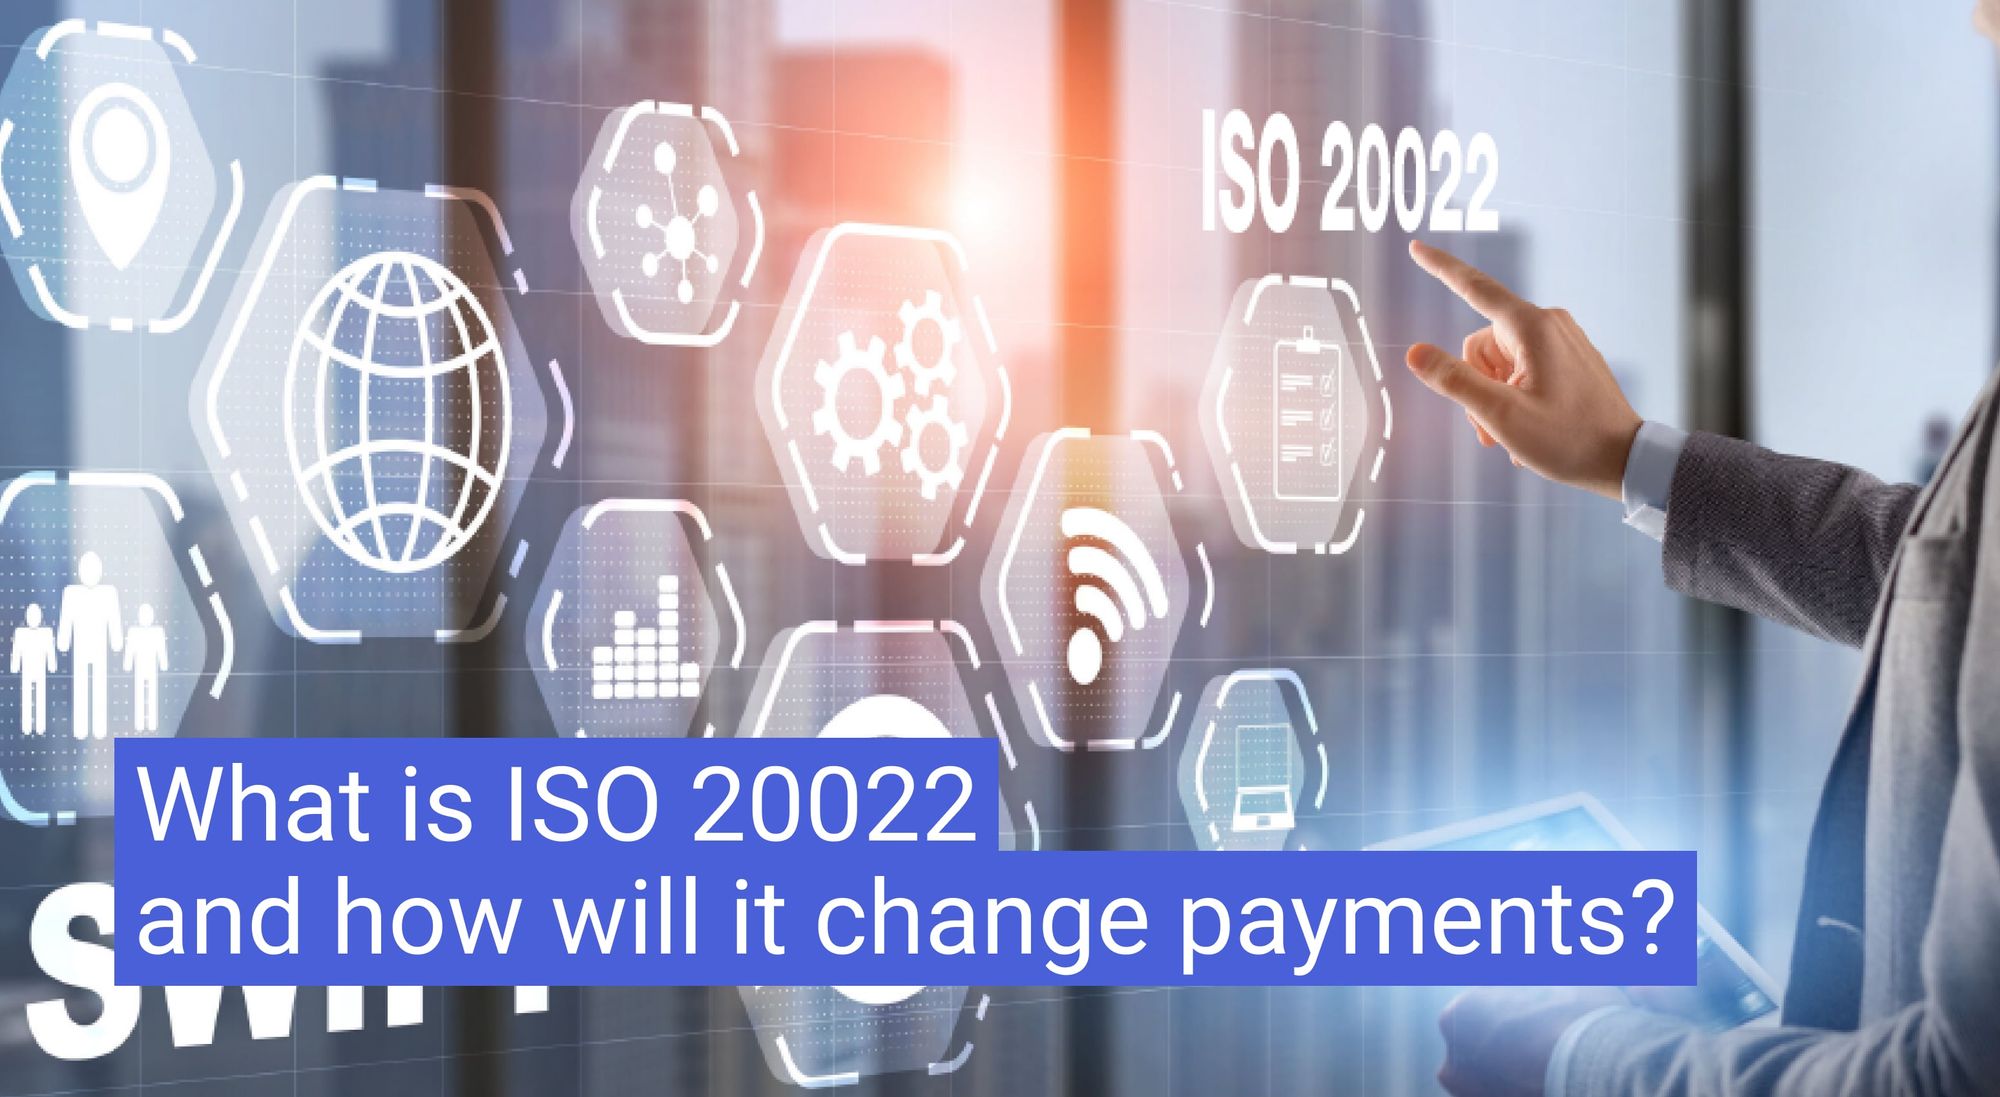 What is ISO 20022 and how will it change payments?